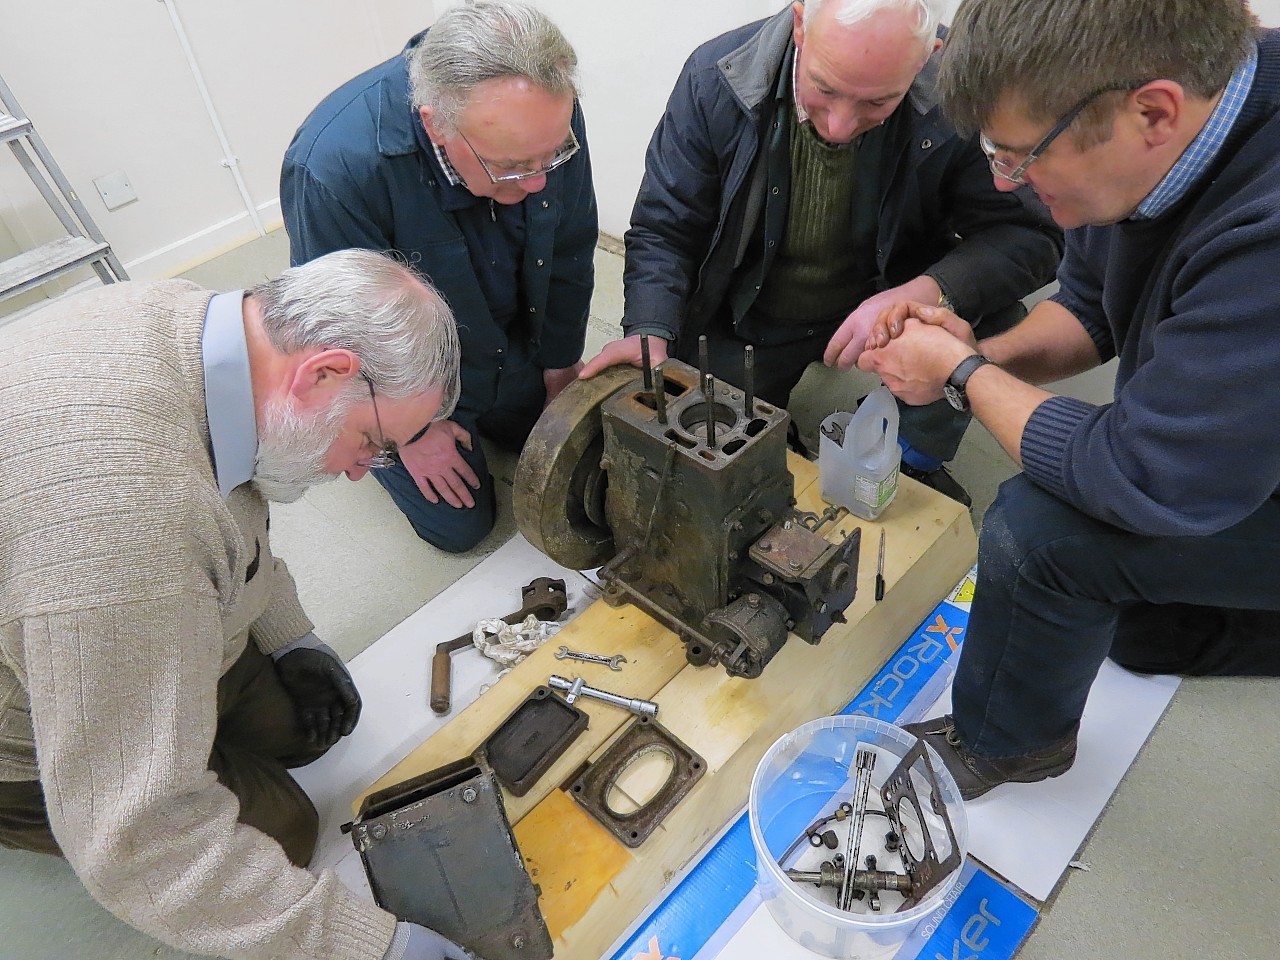 Westhill Men's Shed has opened its doors as a new warm place session